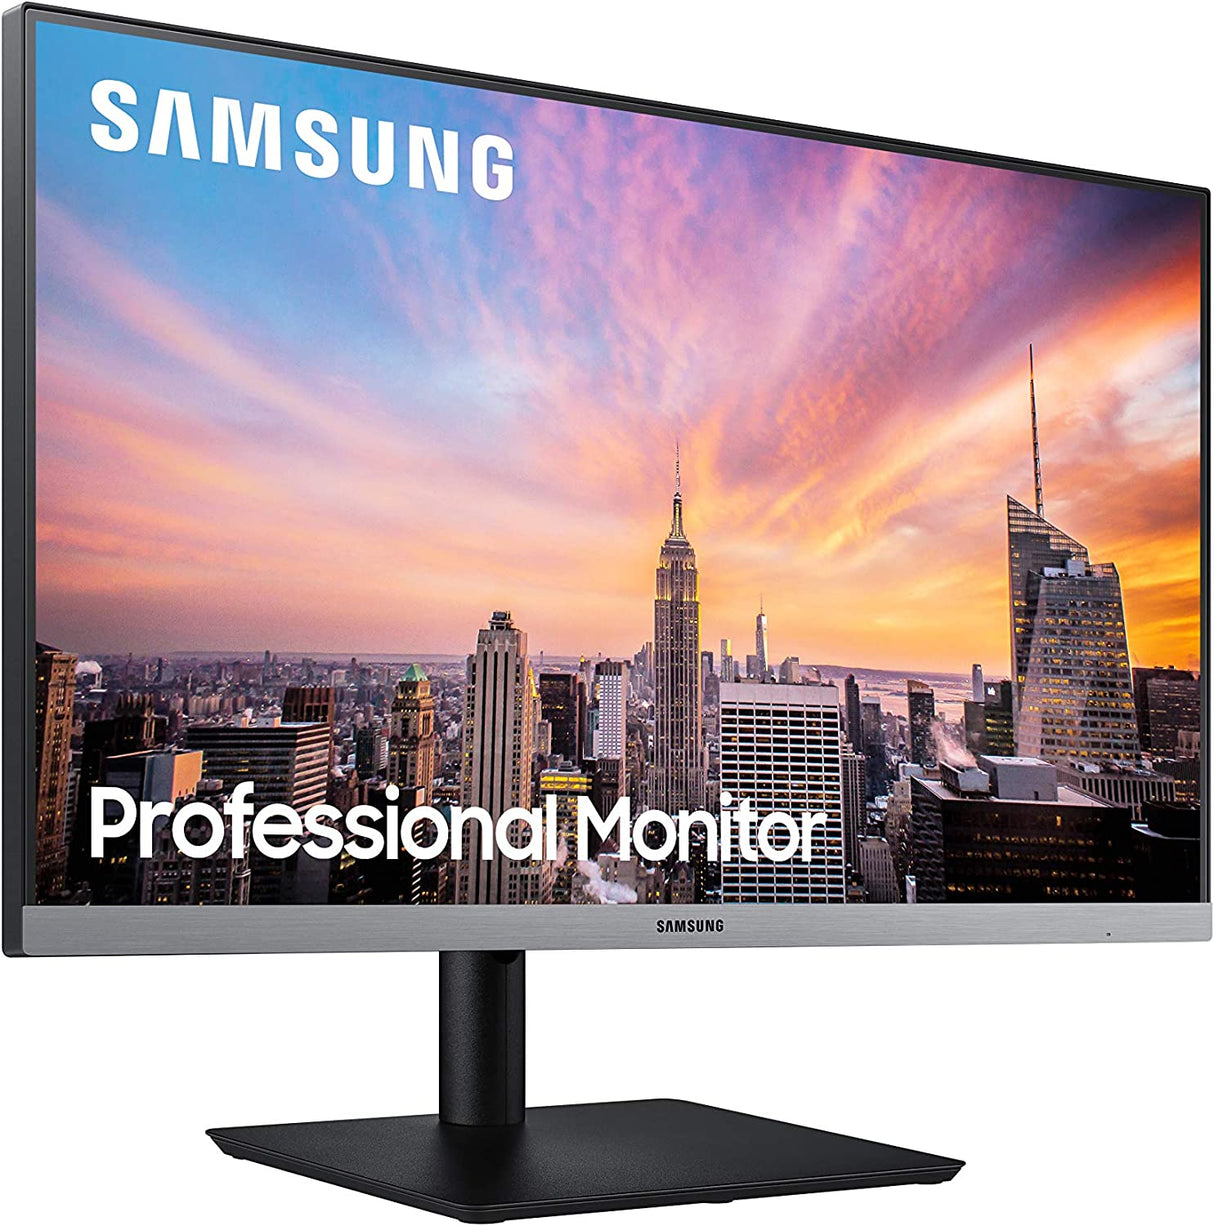 Samsung Business S24R650FDN SR650 Series 24 inch IPS 1080p 75Hz Computer Monitor for Business with VGA, HDMI, DisplayPort, and USB Hub, 3-Year Warranty, Black 24-inch